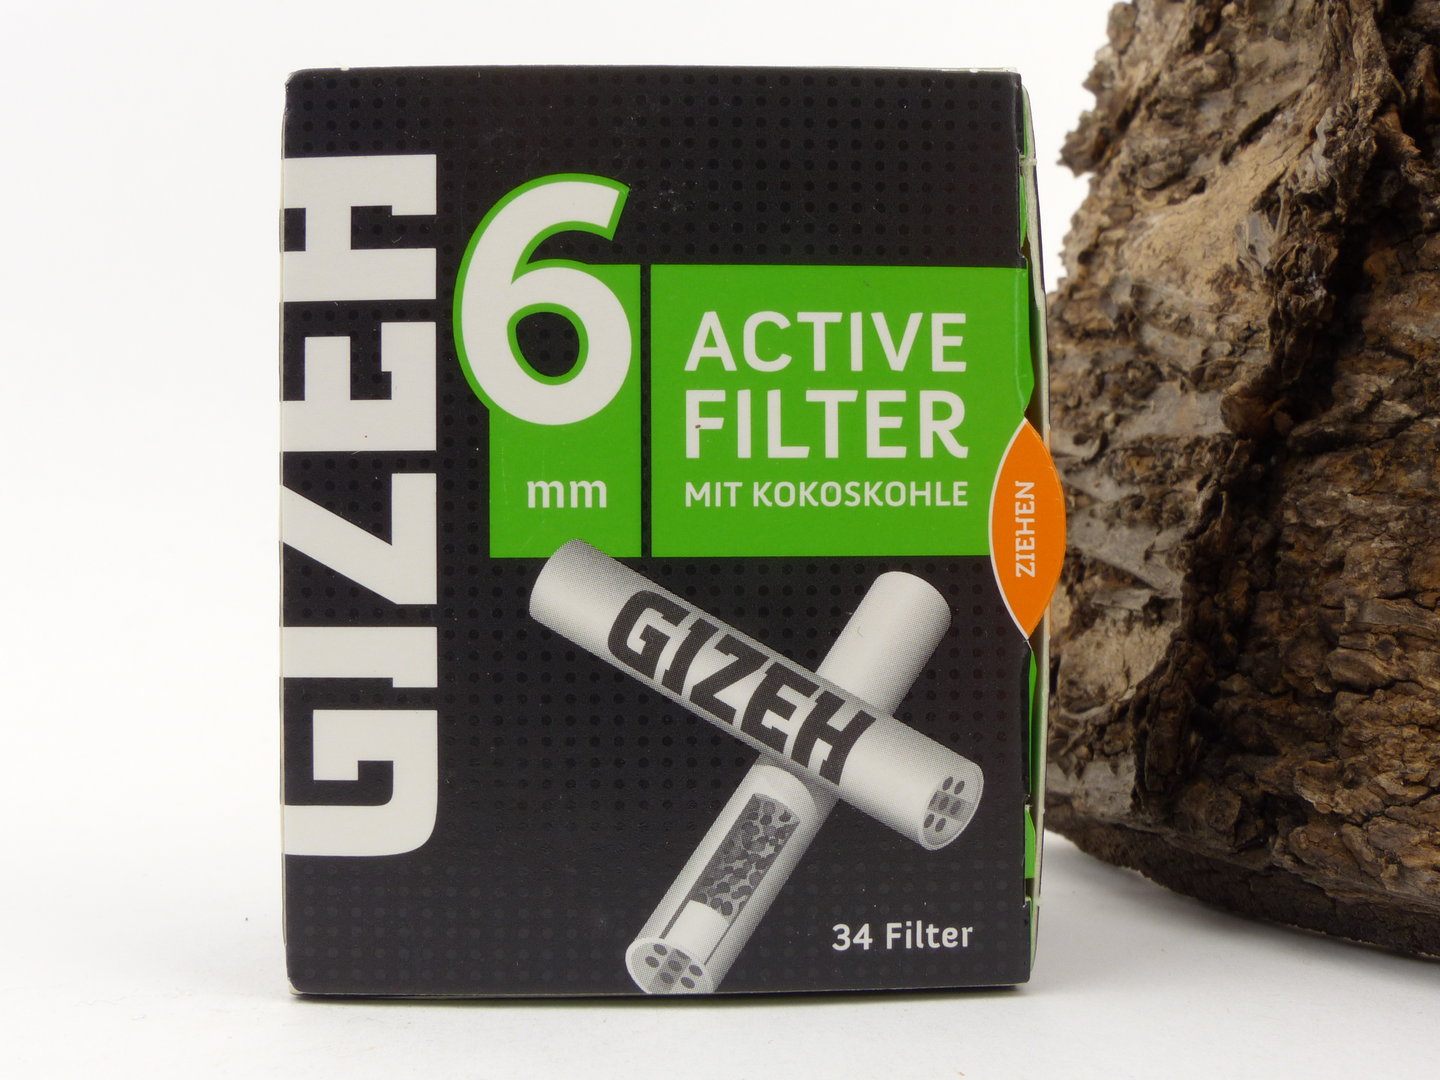 GIZEH Active Filter with activated charcoal, SLIM-format 6 mm diamete, 8,95  €